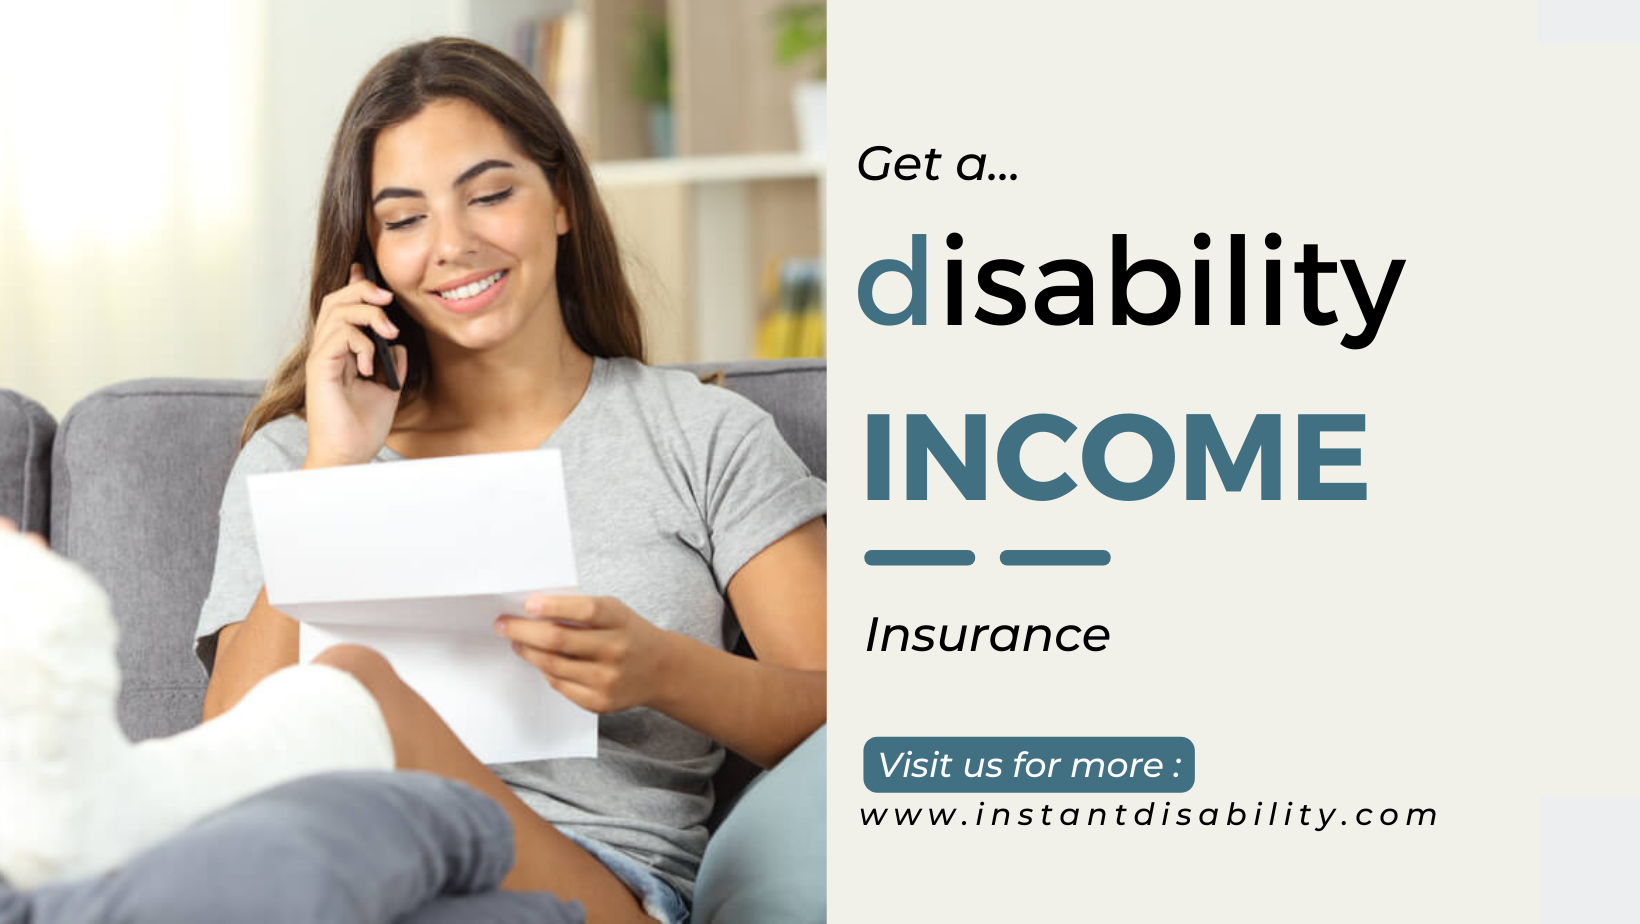 Disability income insurance